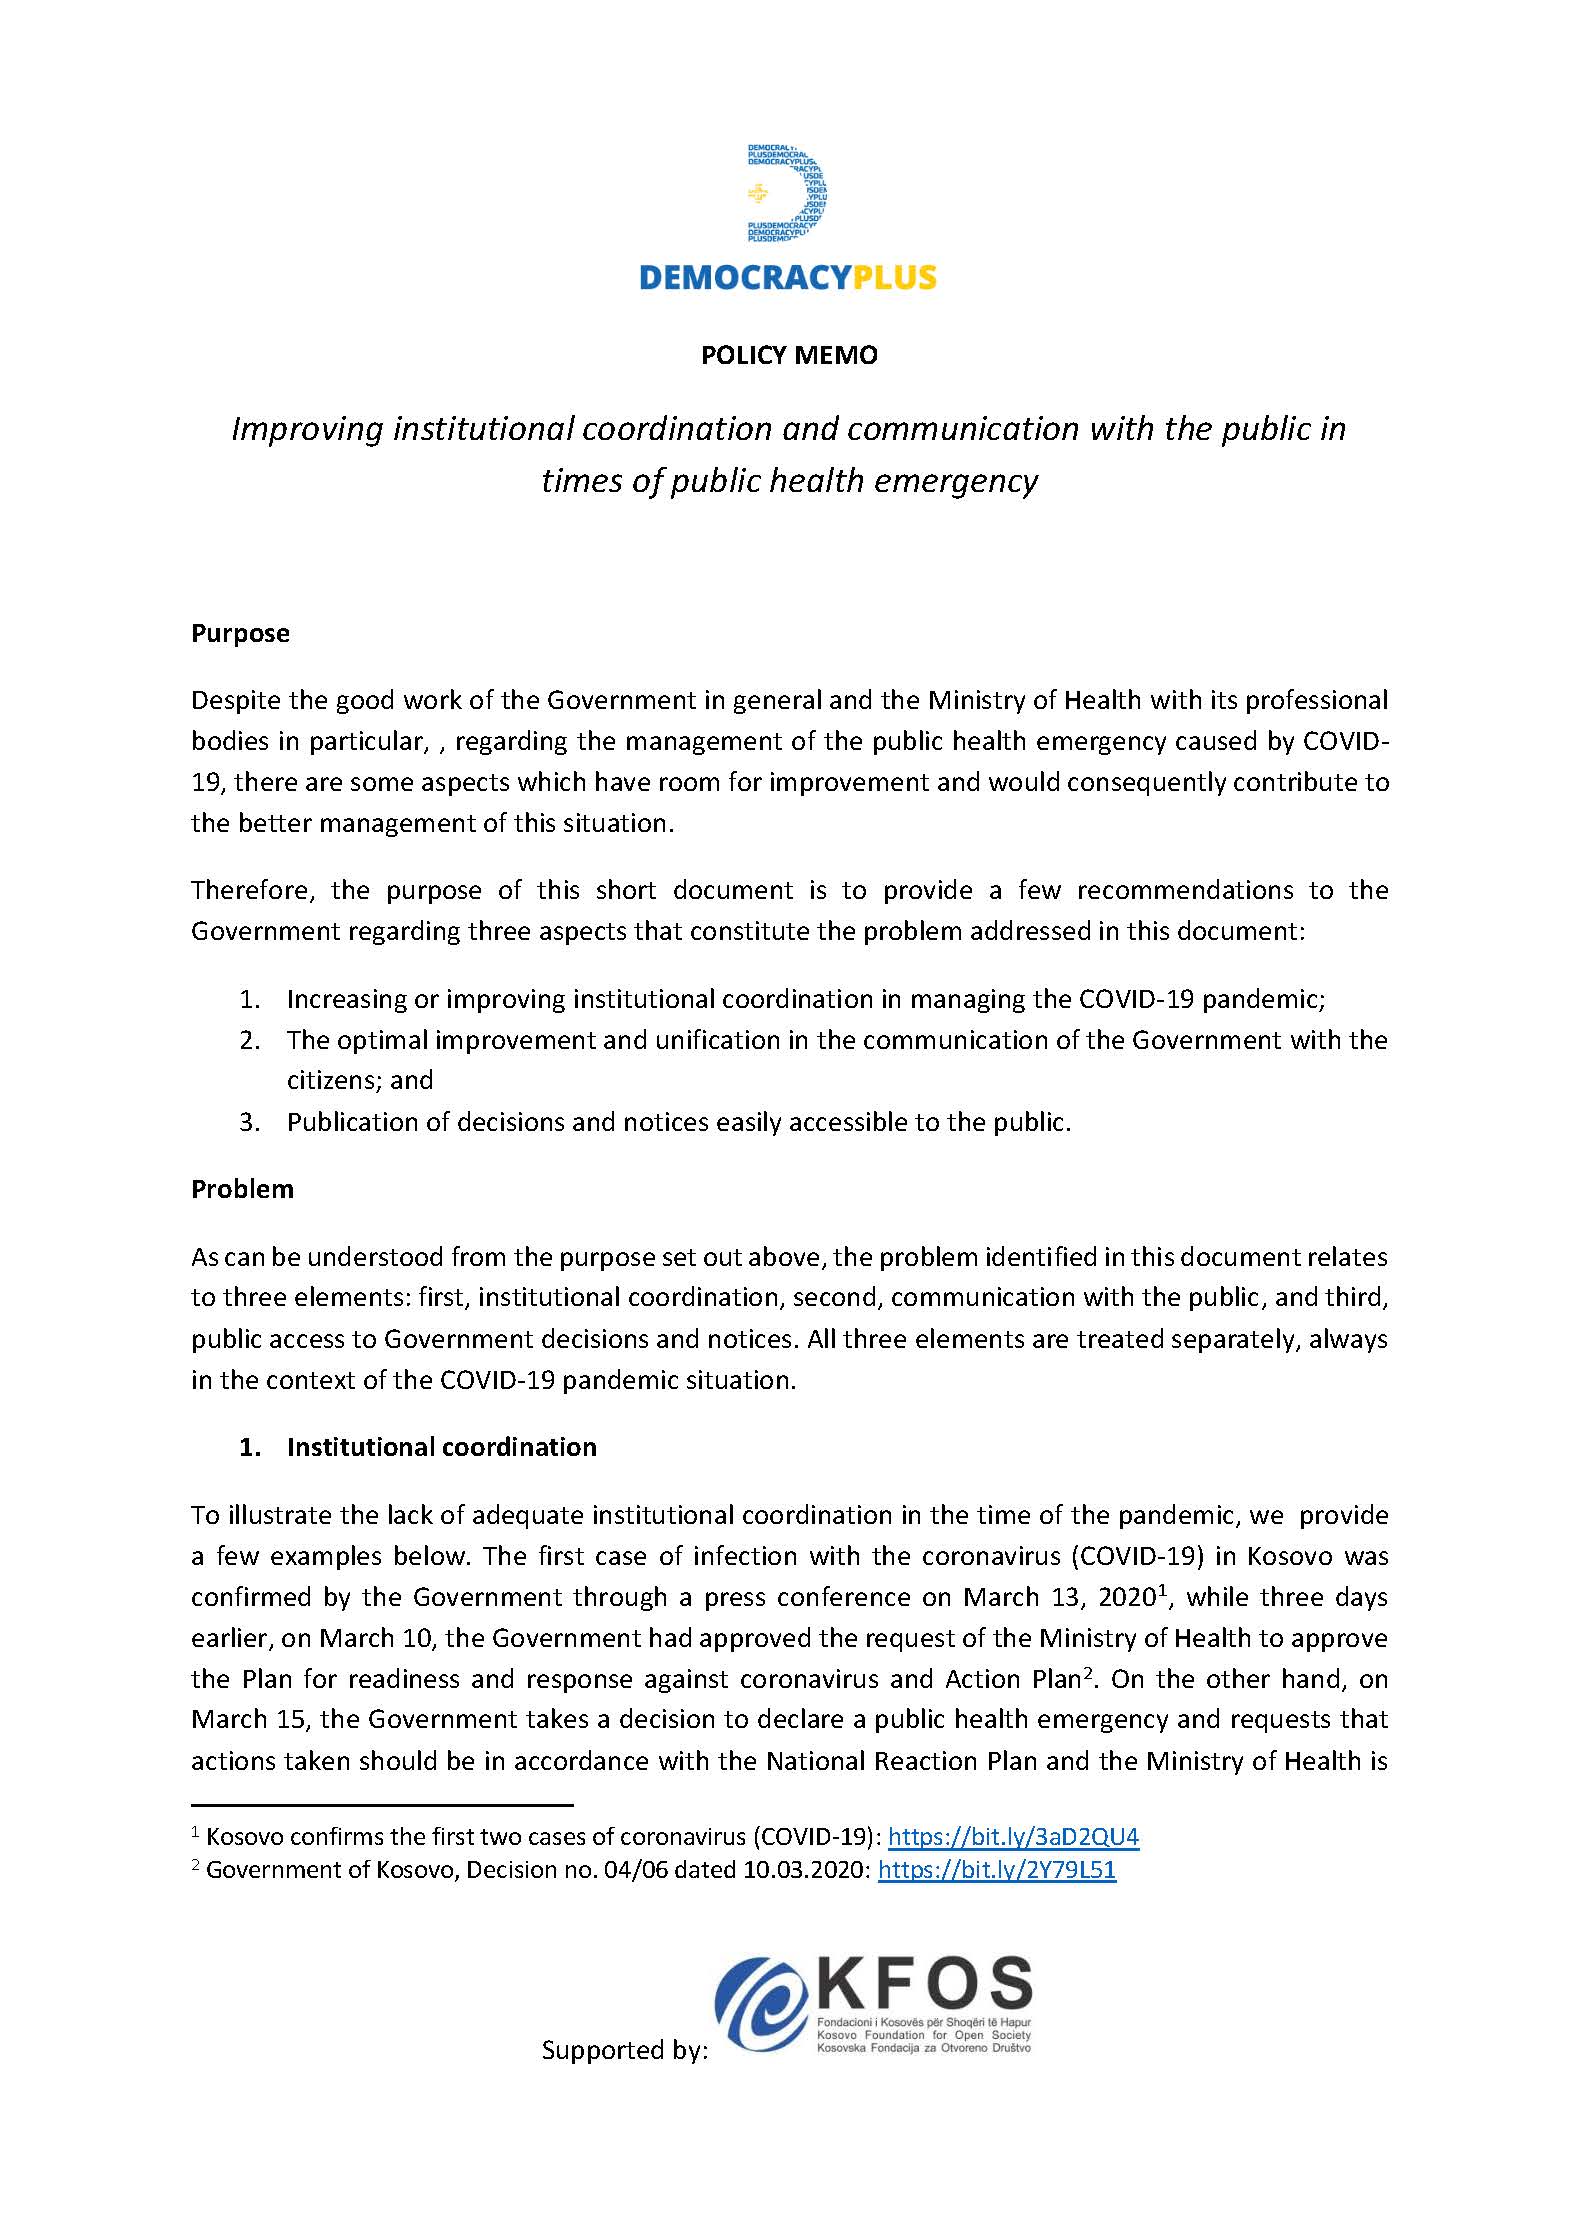 Improving institutional coordination and communication with the public in times of public health emergency